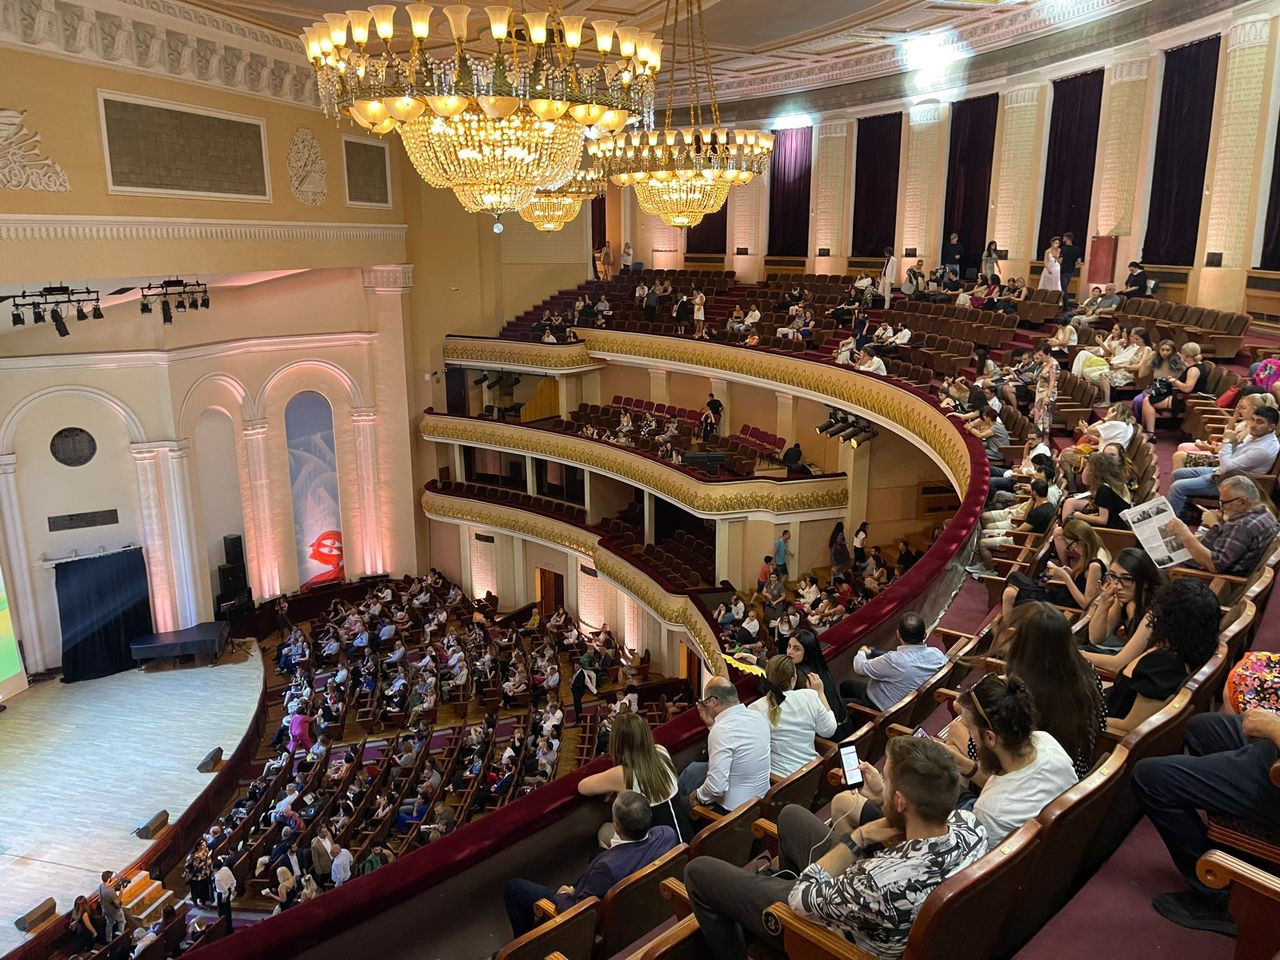 The inside of Aram Khachatryan Concert Hall where the Opening Ceremony was held. – KALASH NANDA KUMAR/The Vibes pic